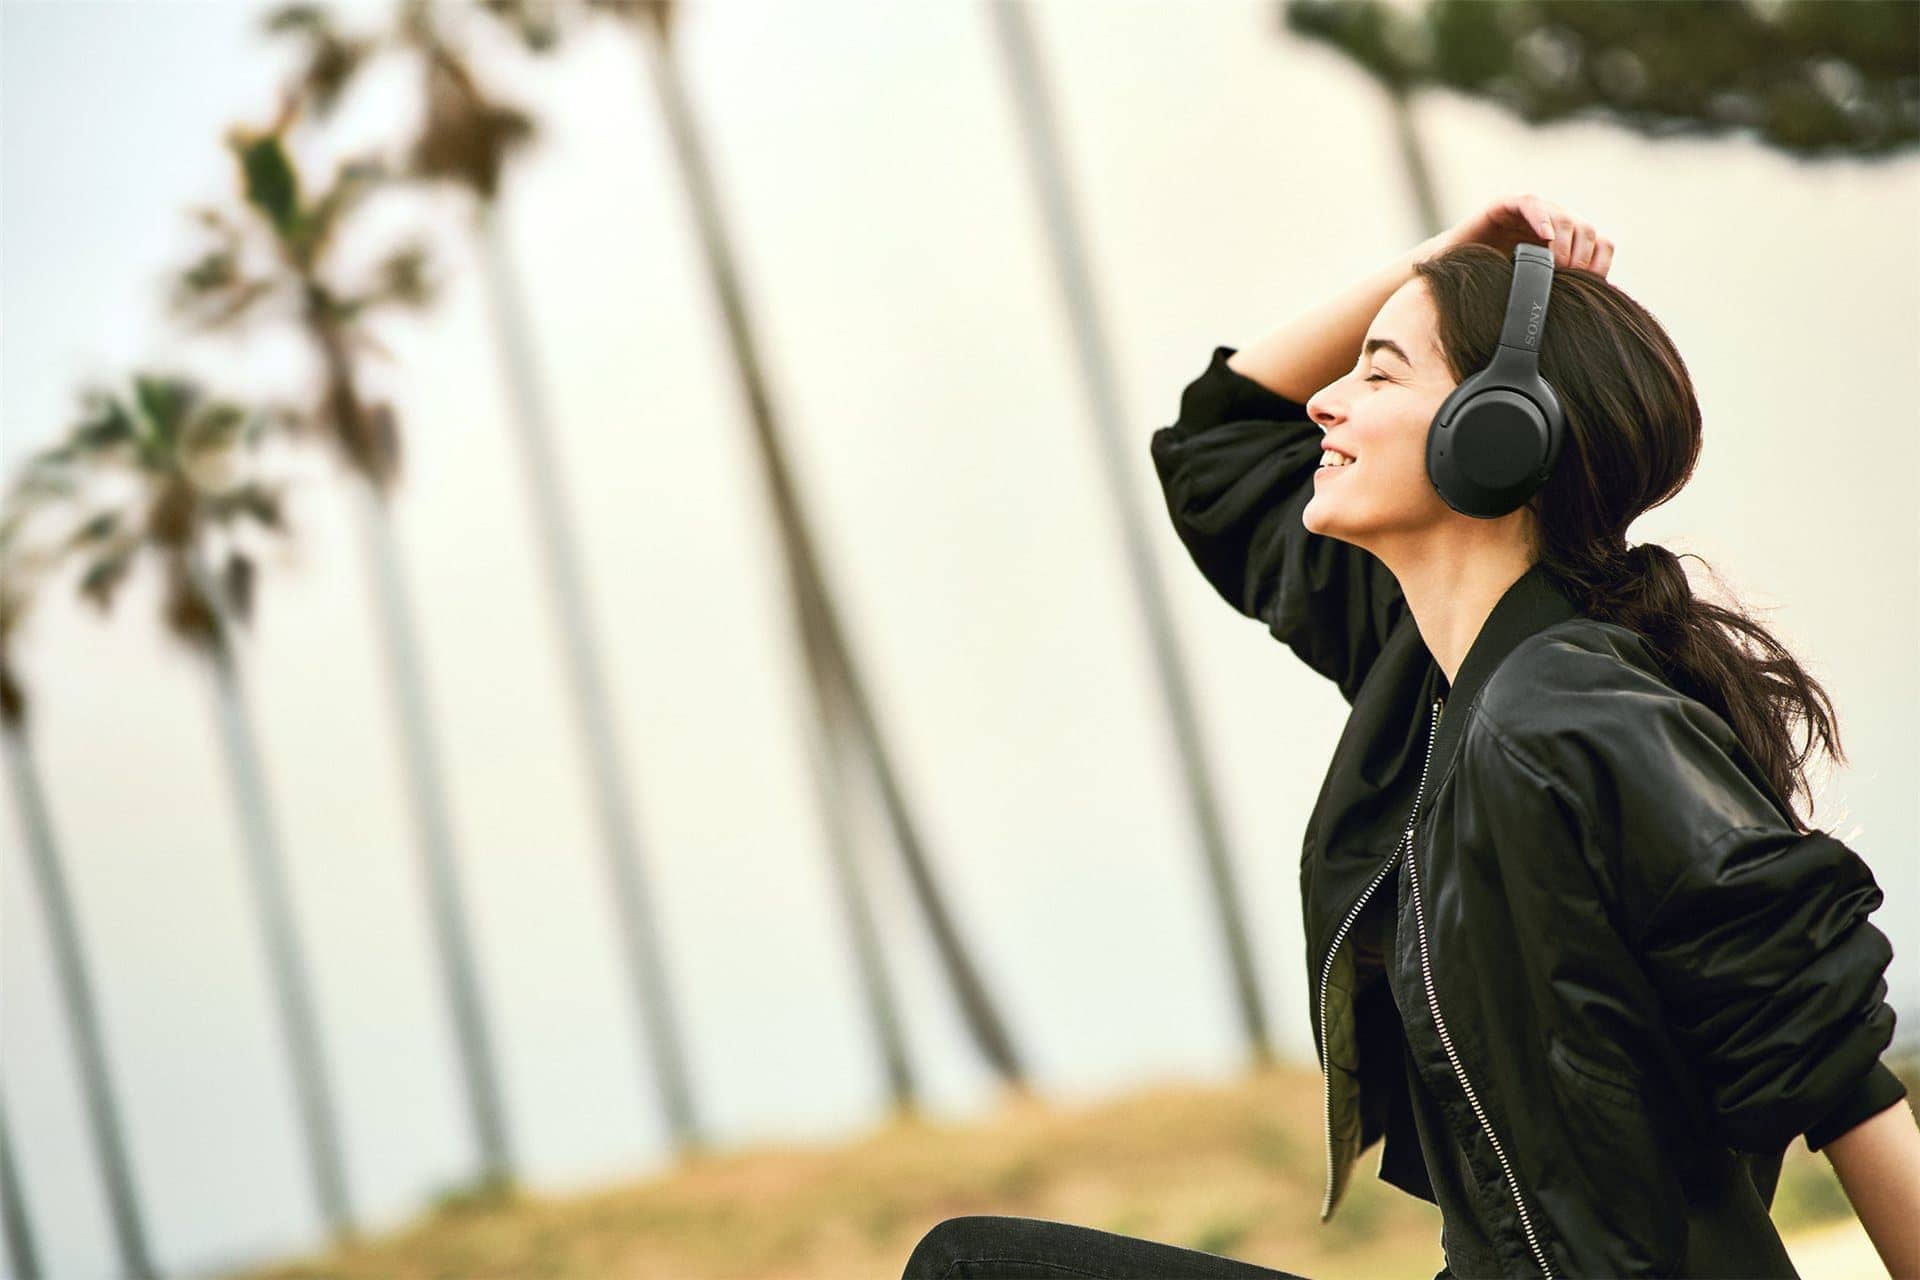 Sony’s new wireless, noise-cancelling headset, the WH-XB900N, is coming